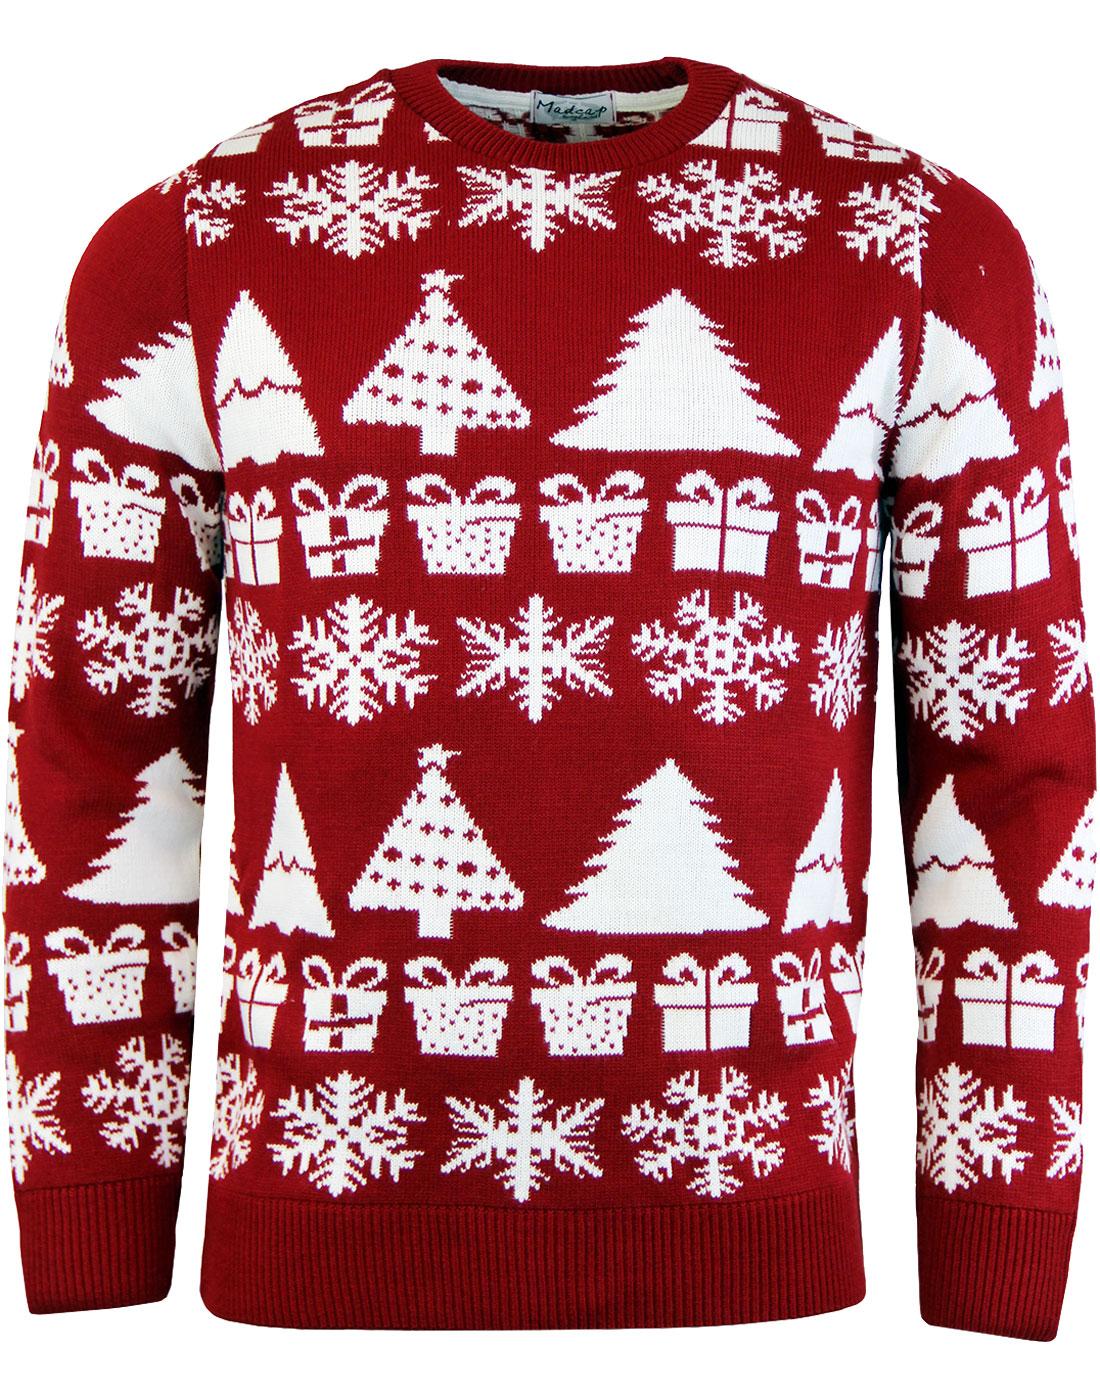 The Night Before Christmas Jumper - Retro knit Top